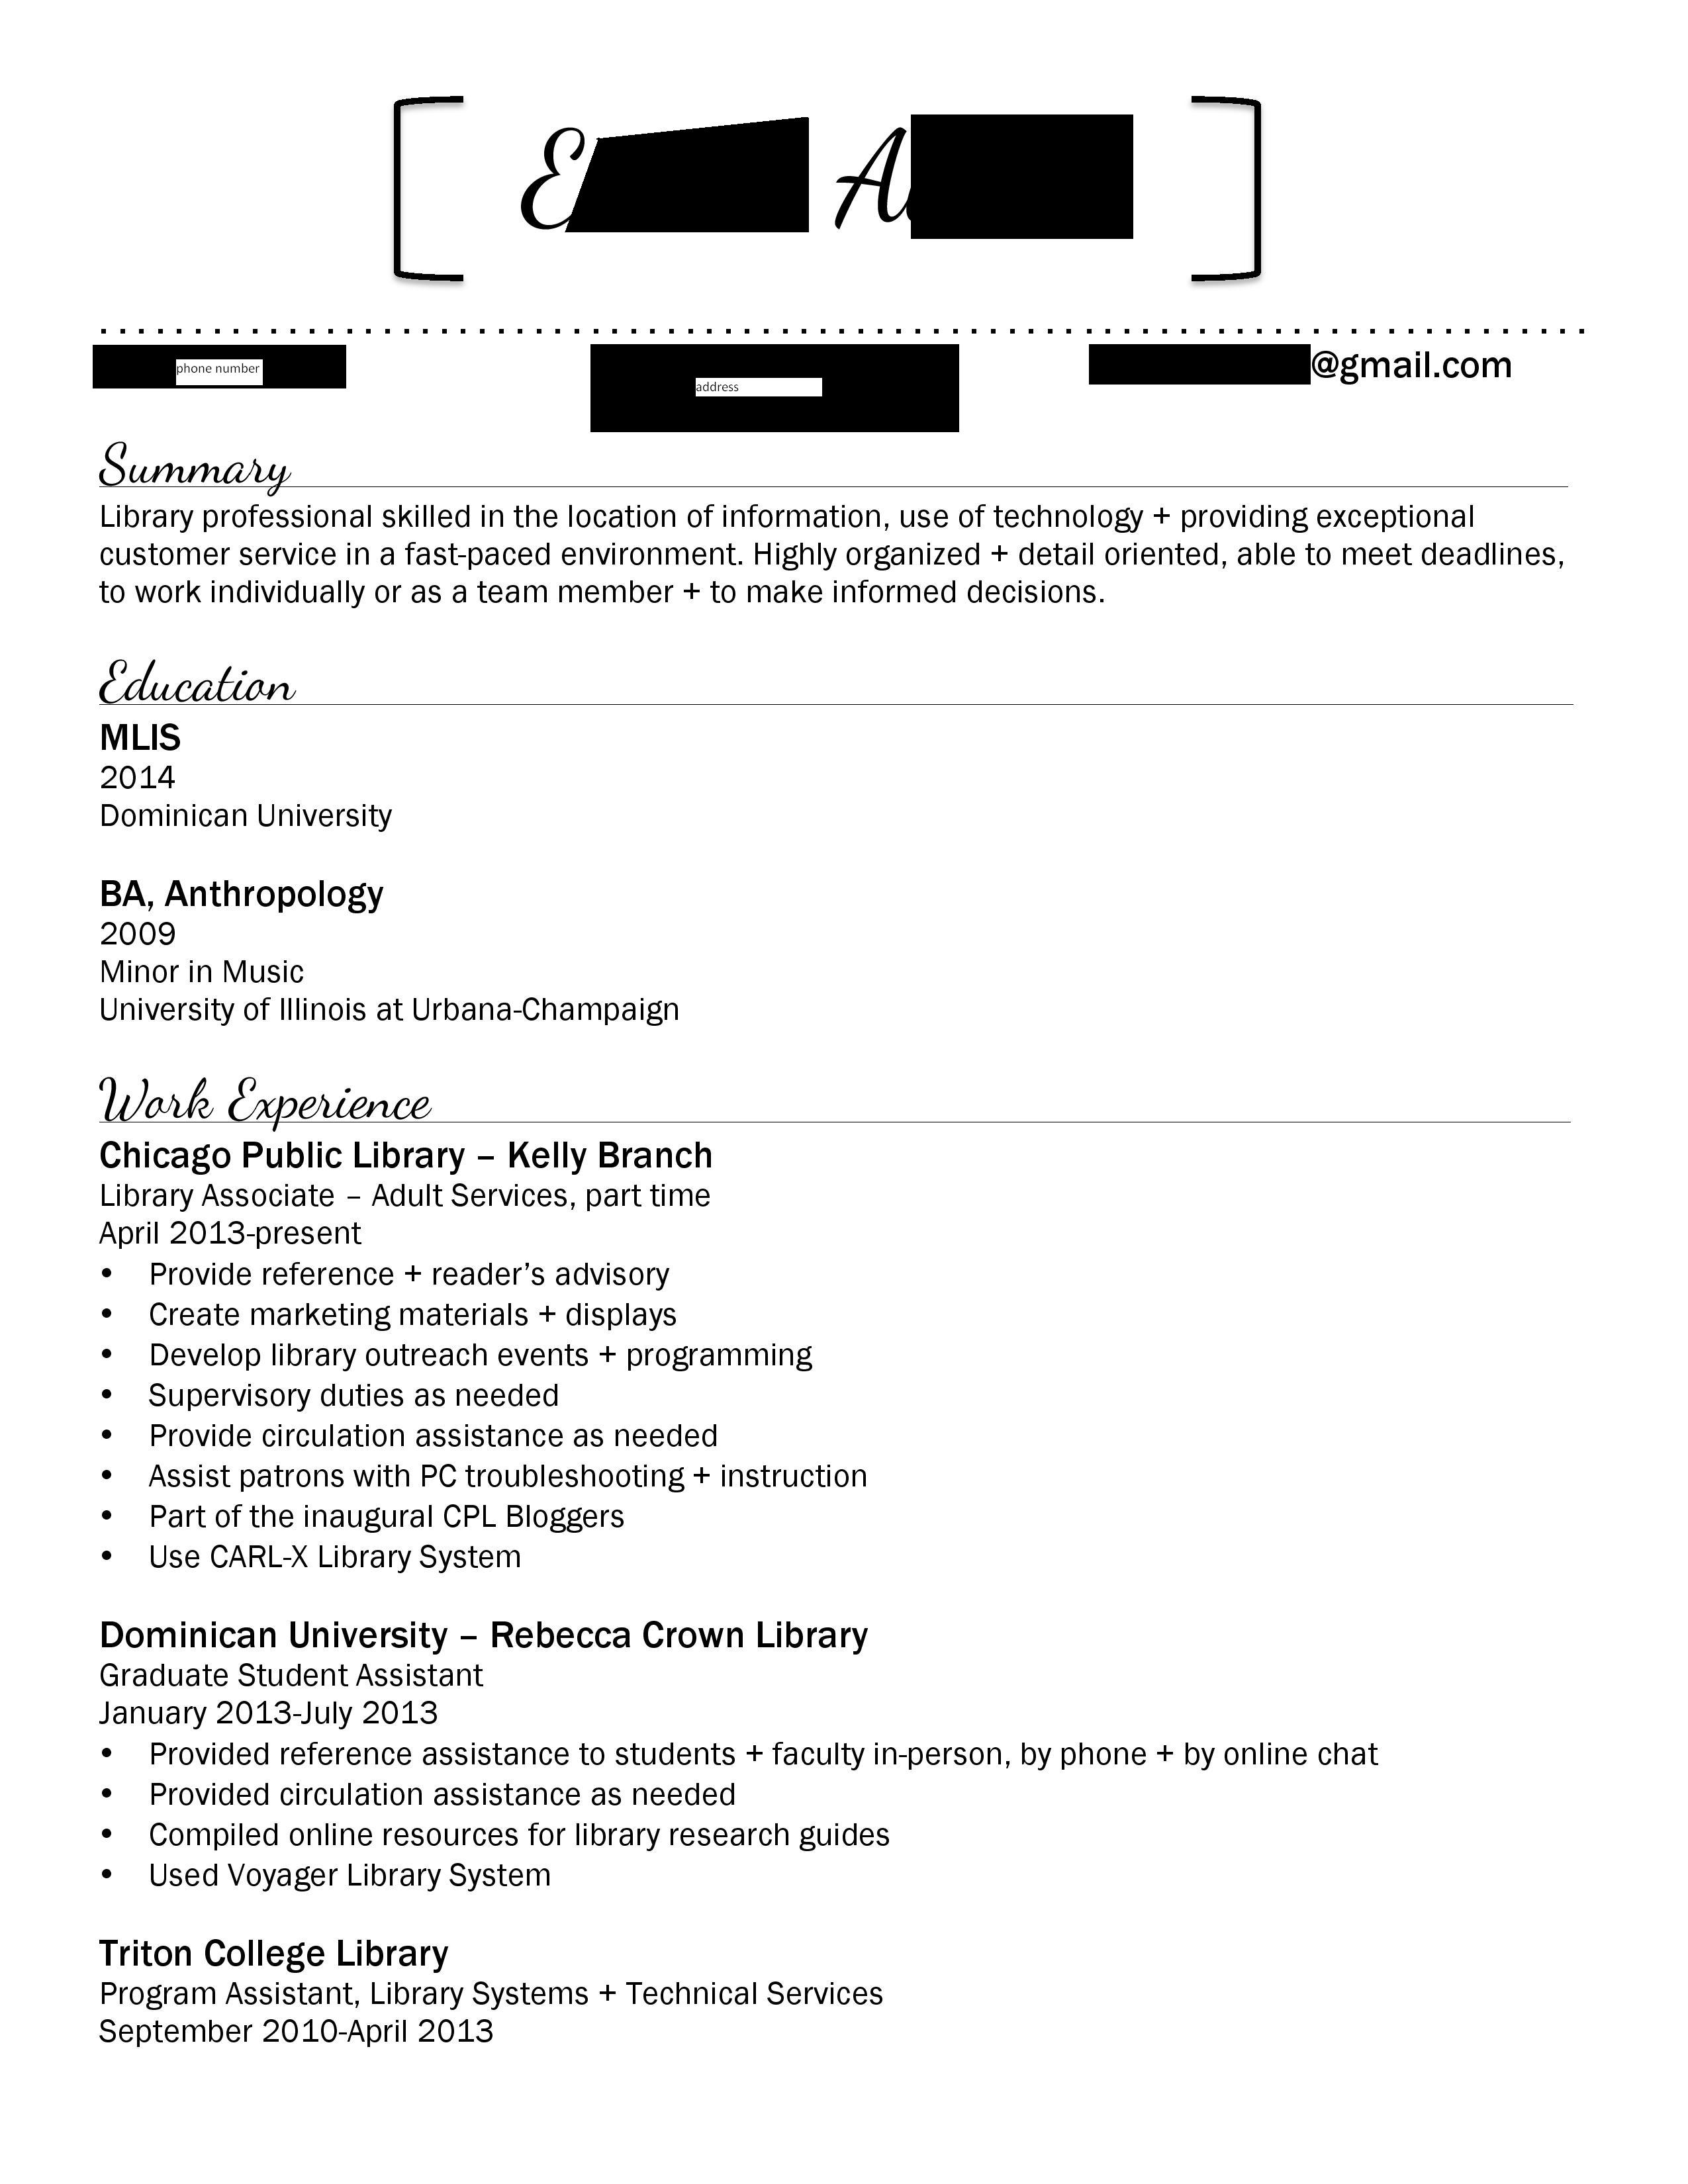 Cover Letter Salary Requirements from hiringlibrarians.files.wordpress.com